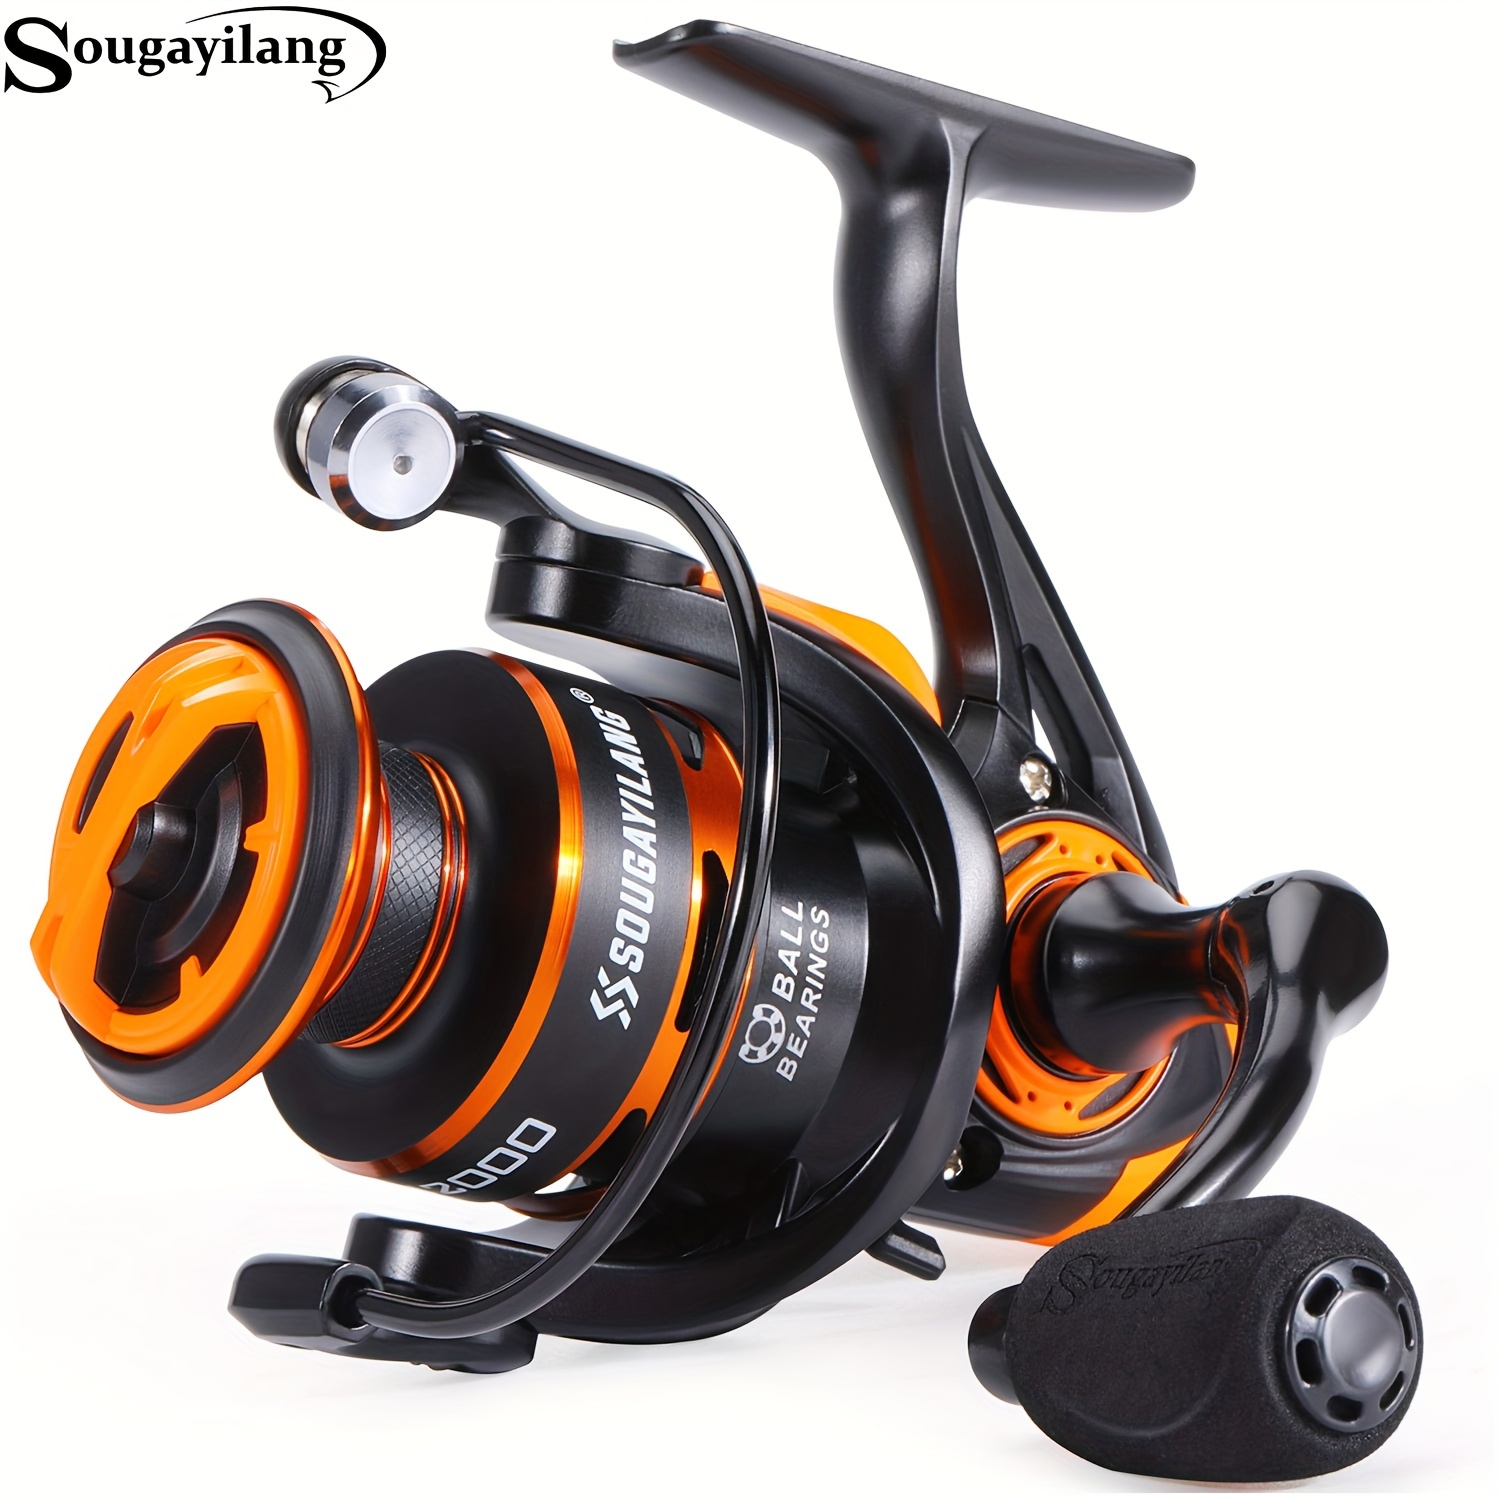 Spinning Reel, Smooth Fresh and Saltwater Fishing Reel, CNC Machined Sealed  Body, for Bass Catfish Crappie Trout, Spinning Fishing Reel 1000-7000